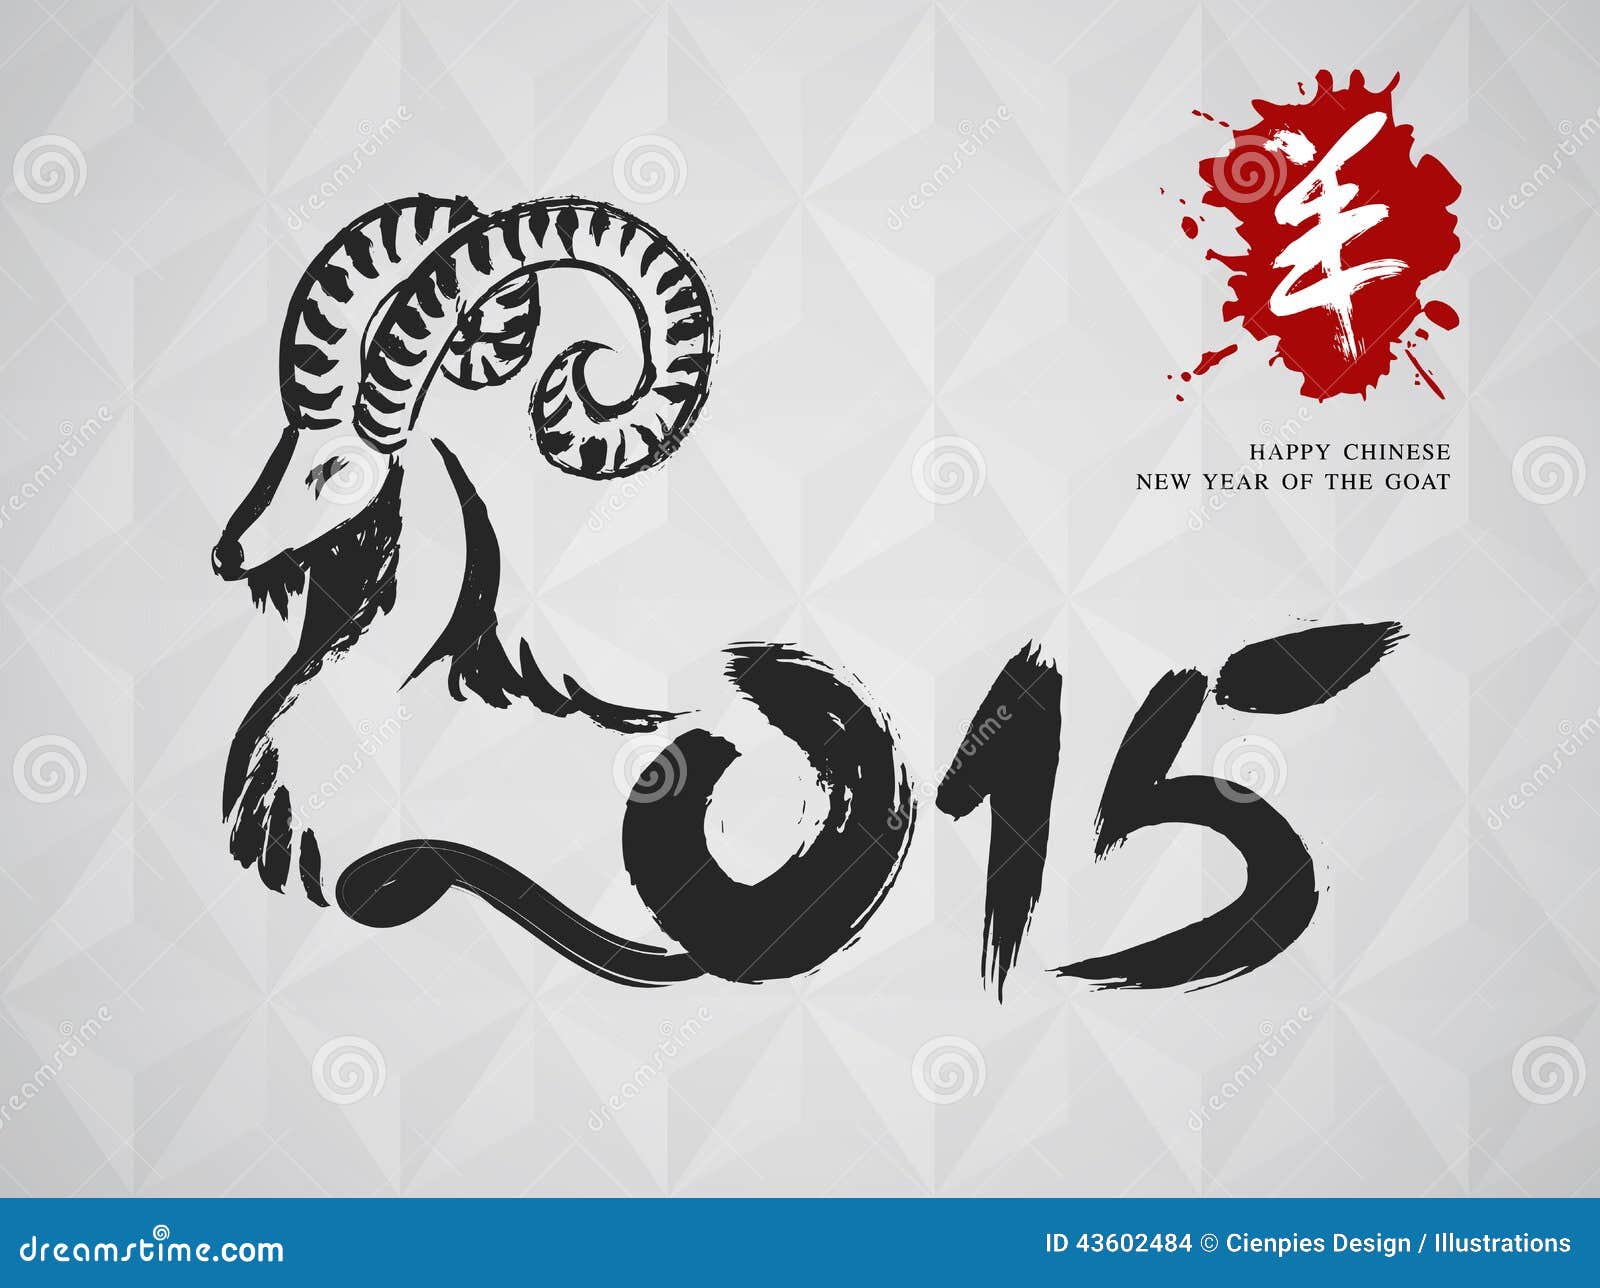 new-year-goat-geometric-background-chinese-calligraphy-hand-drawn-animal-composition-eps-vector-file-organized-43602484.jpg